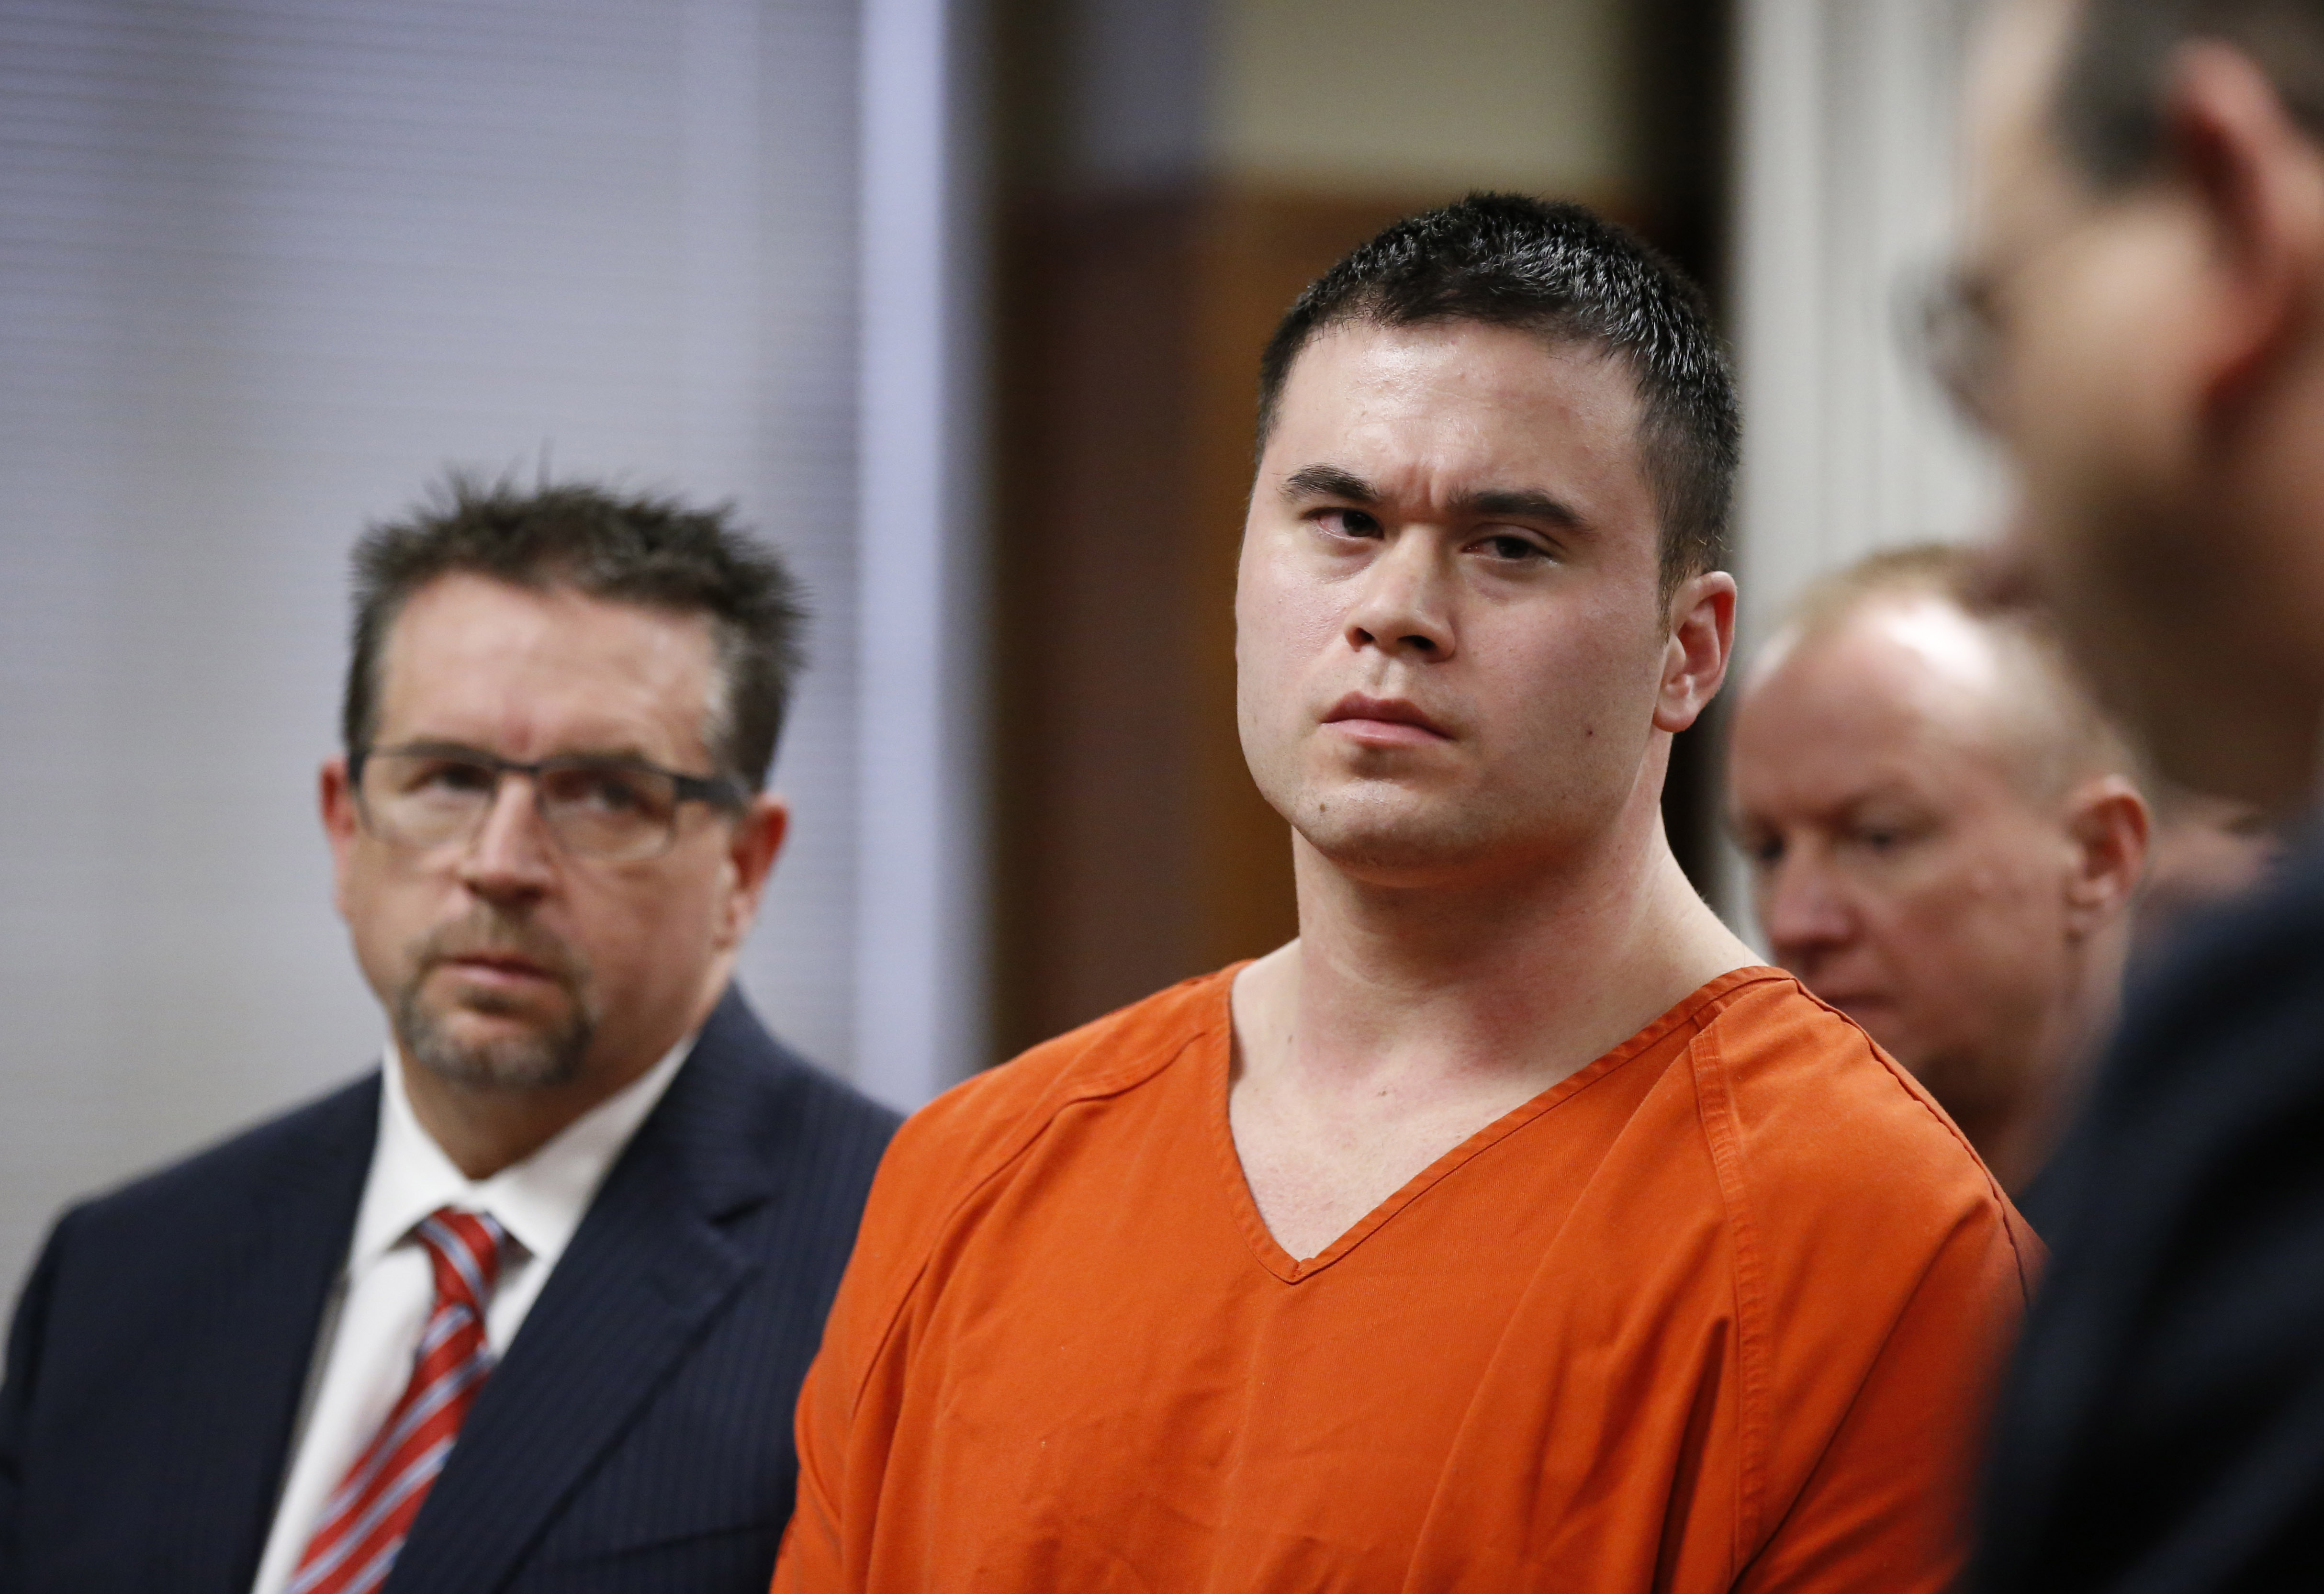 Daniel Holtzclaw,center, listens as Gayland Gieger, right, Oklahoma County assistant district attorney, speaks during Holtzclaw's sentencing hearing in Oklahoma City, Thursday, Jan. 21, 2016. At left is defense attorney Scott Adams. (AP Photo/Sue Ogrocki, Pool)